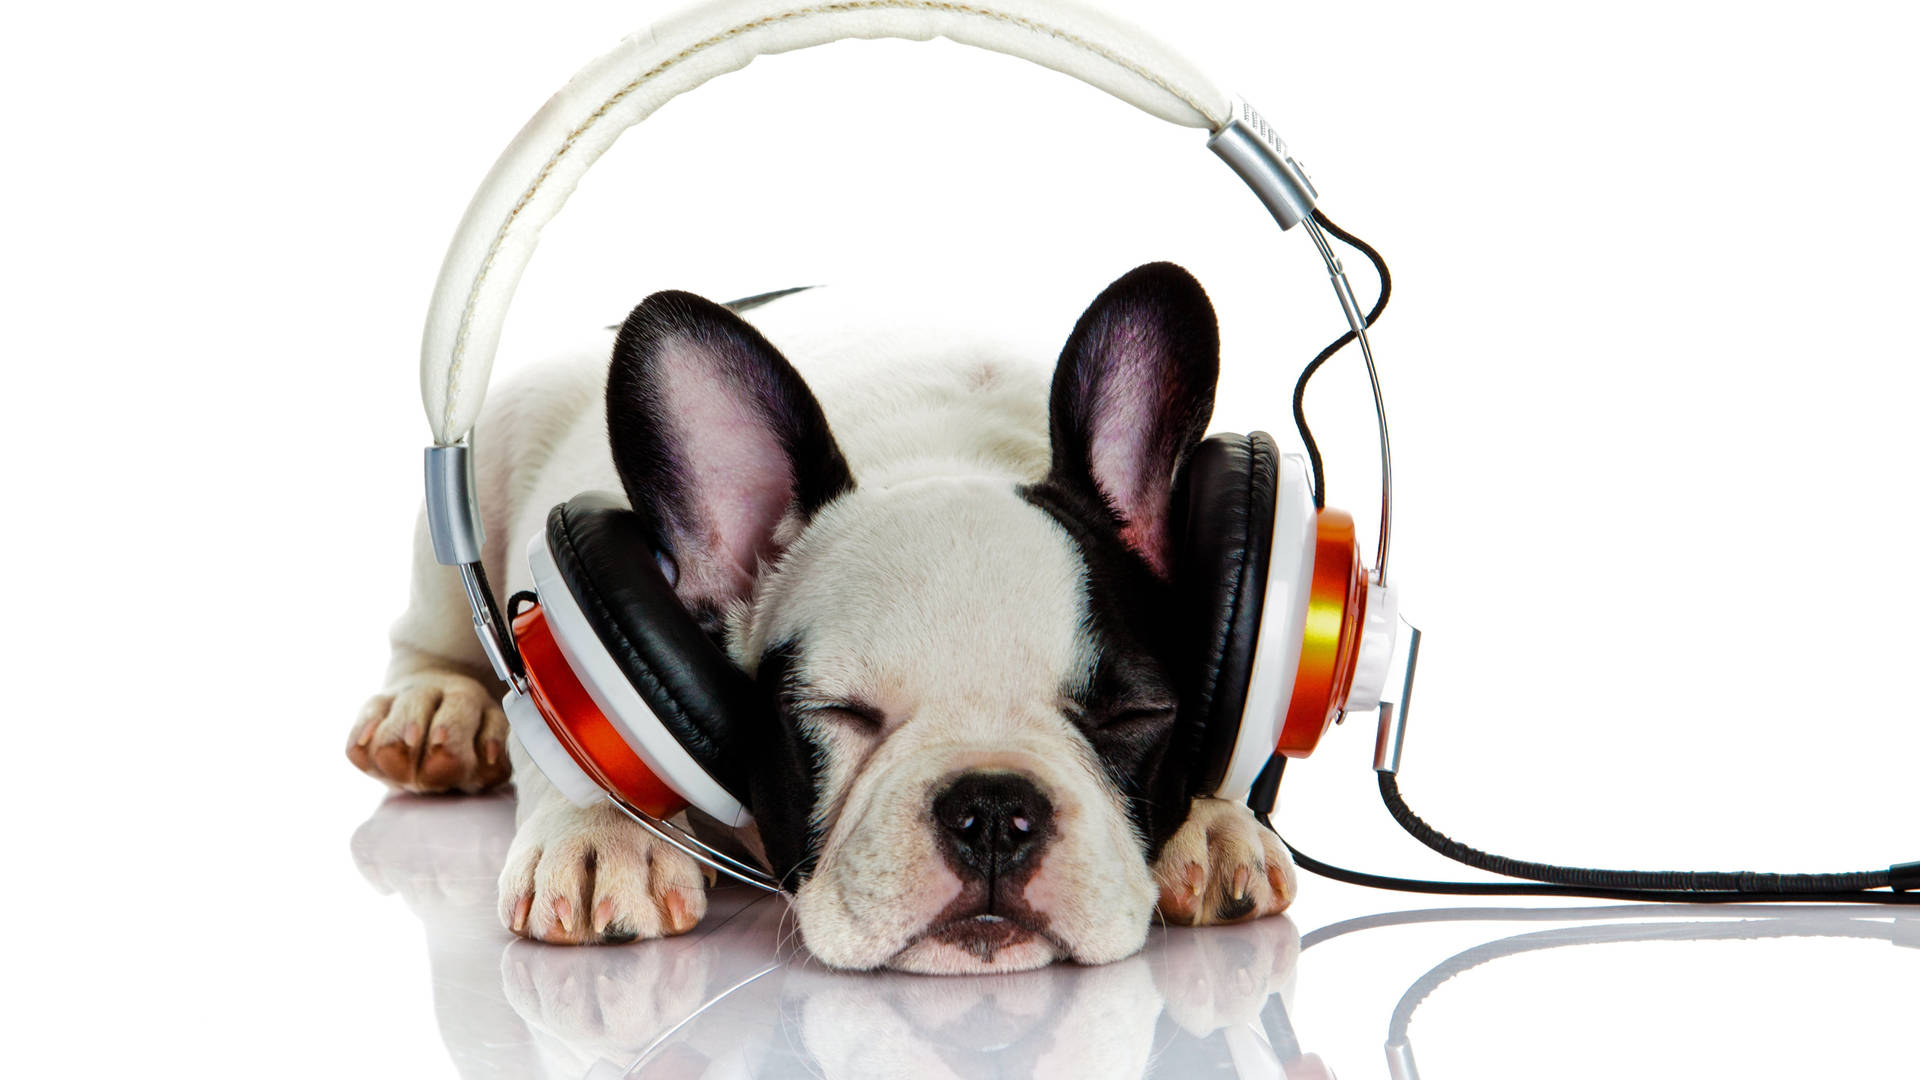 Show Your Friends And Family The Latest Tech By Sending Them A Picture Of This Cool Pup With A Headset.